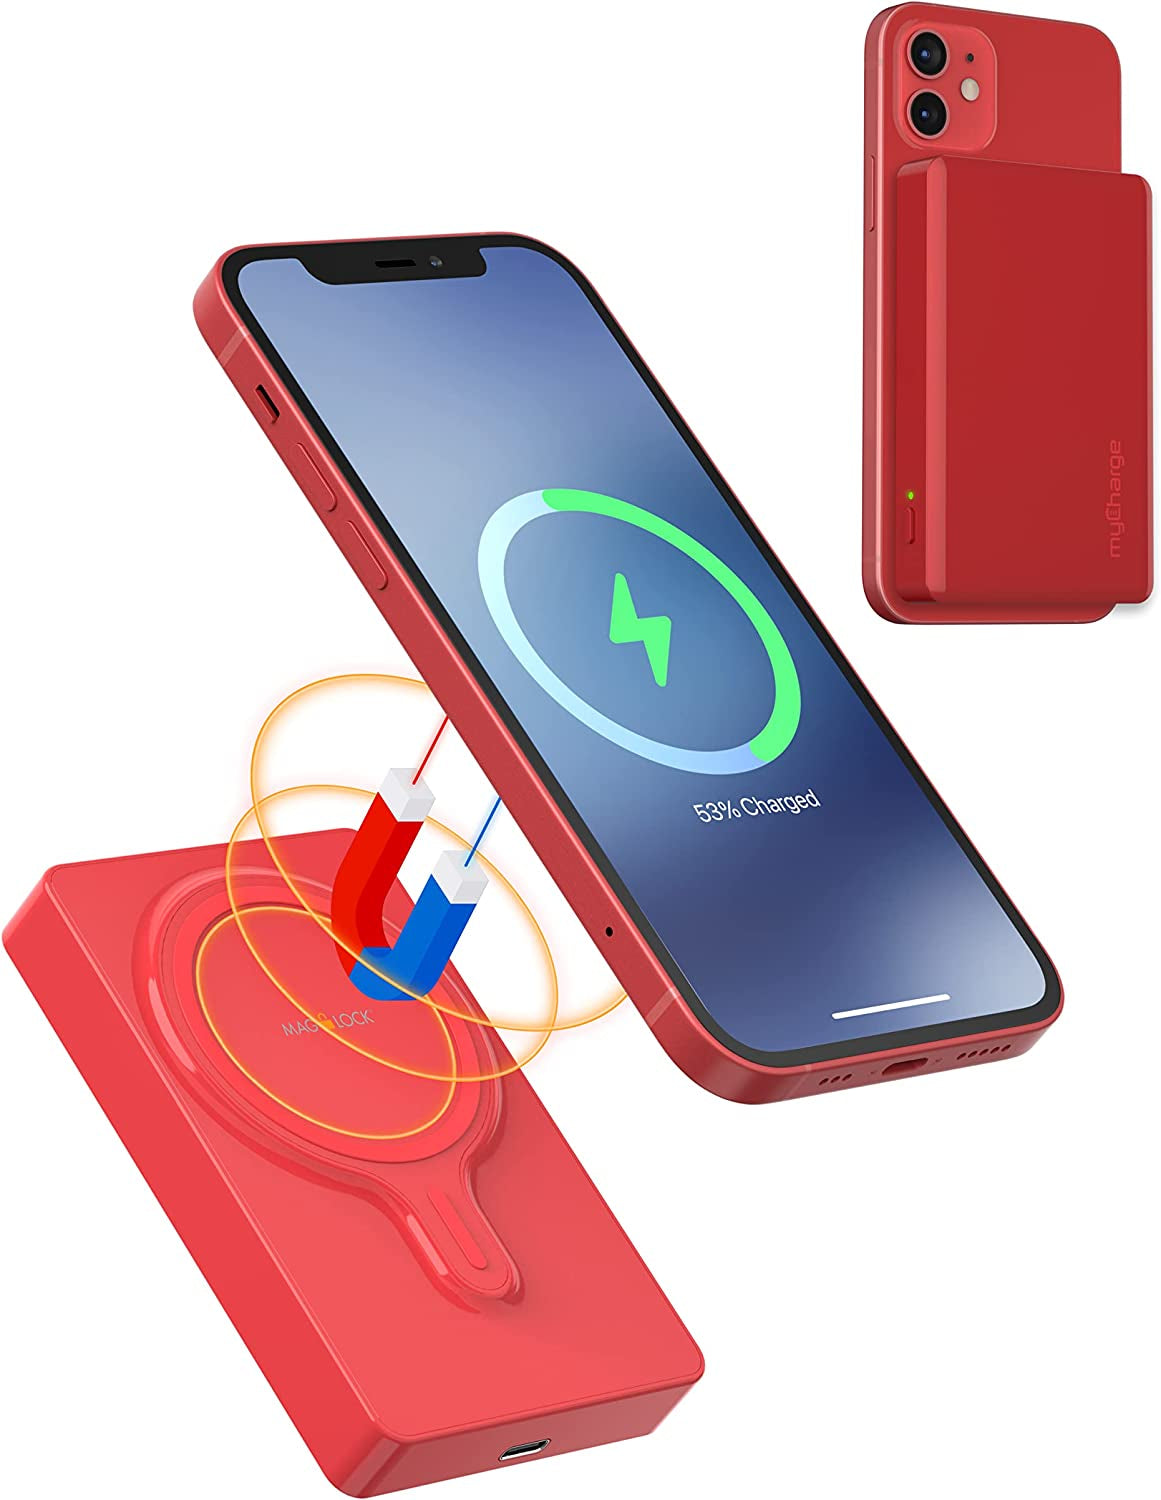 Portable Charger Iphone 14, 13, 12 & Mag Safe Cases - Maglock 9000Mah Wireless Magnetic Power Bank - Compatible with Magsafe Battery Pack, USB C Cable Input/Output - Red